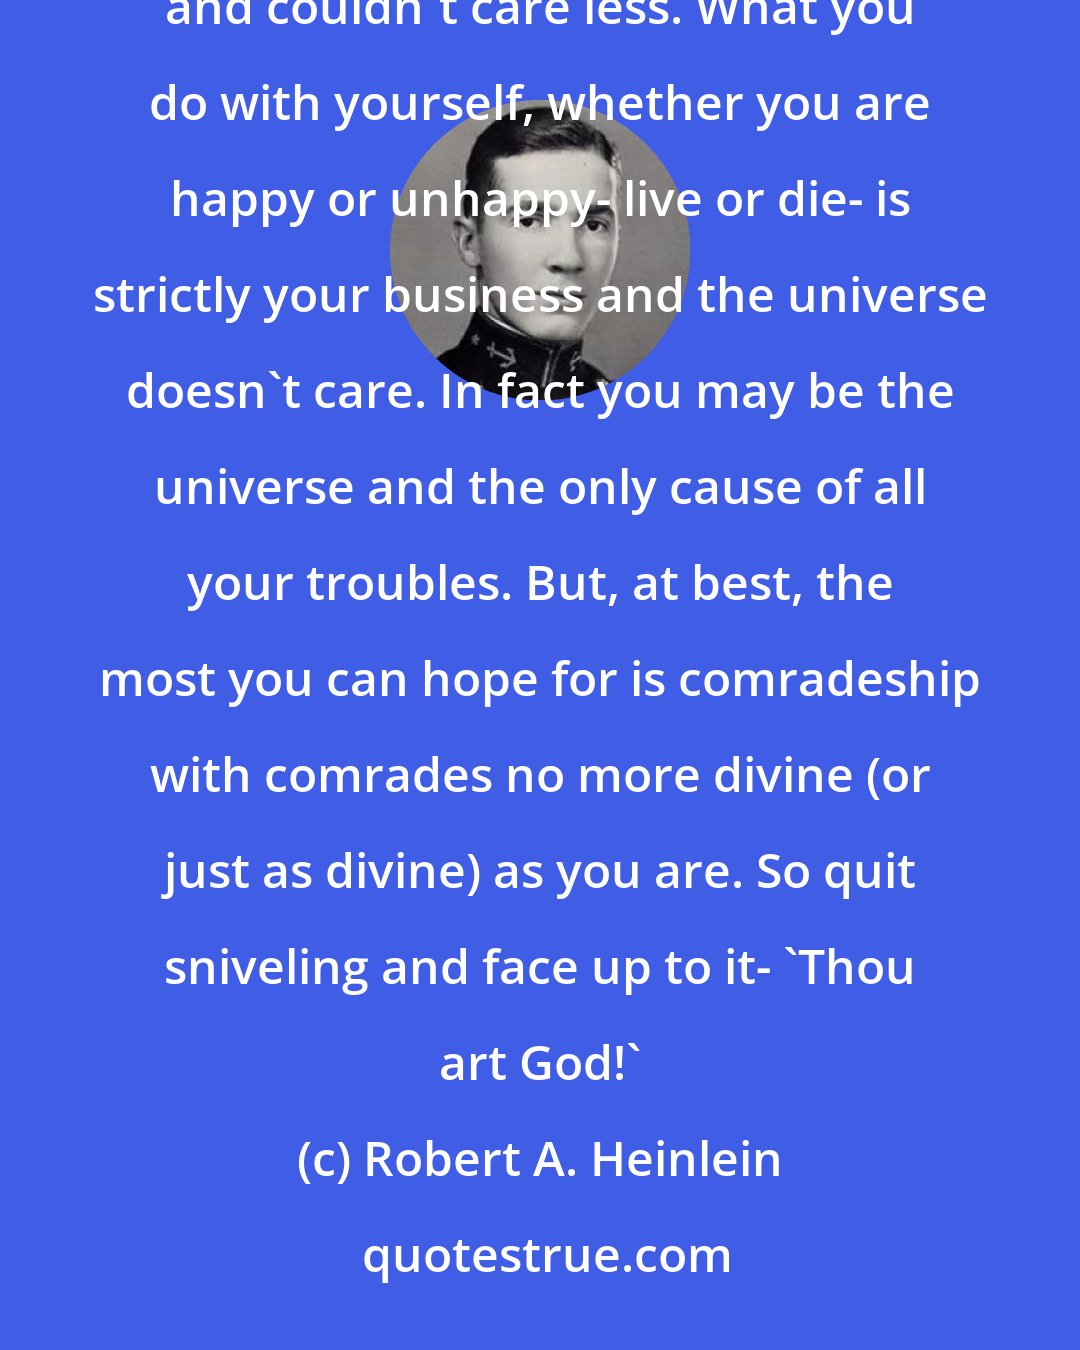 Robert A. Heinlein: Don't appeal to mercy to God the Father up in the sky, little man, because he's not at home and never was at home, and couldn't care less. What you do with yourself, whether you are happy or unhappy- live or die- is strictly your business and the universe doesn't care. In fact you may be the universe and the only cause of all your troubles. But, at best, the most you can hope for is comradeship with comrades no more divine (or just as divine) as you are. So quit sniveling and face up to it- 'Thou art God!'